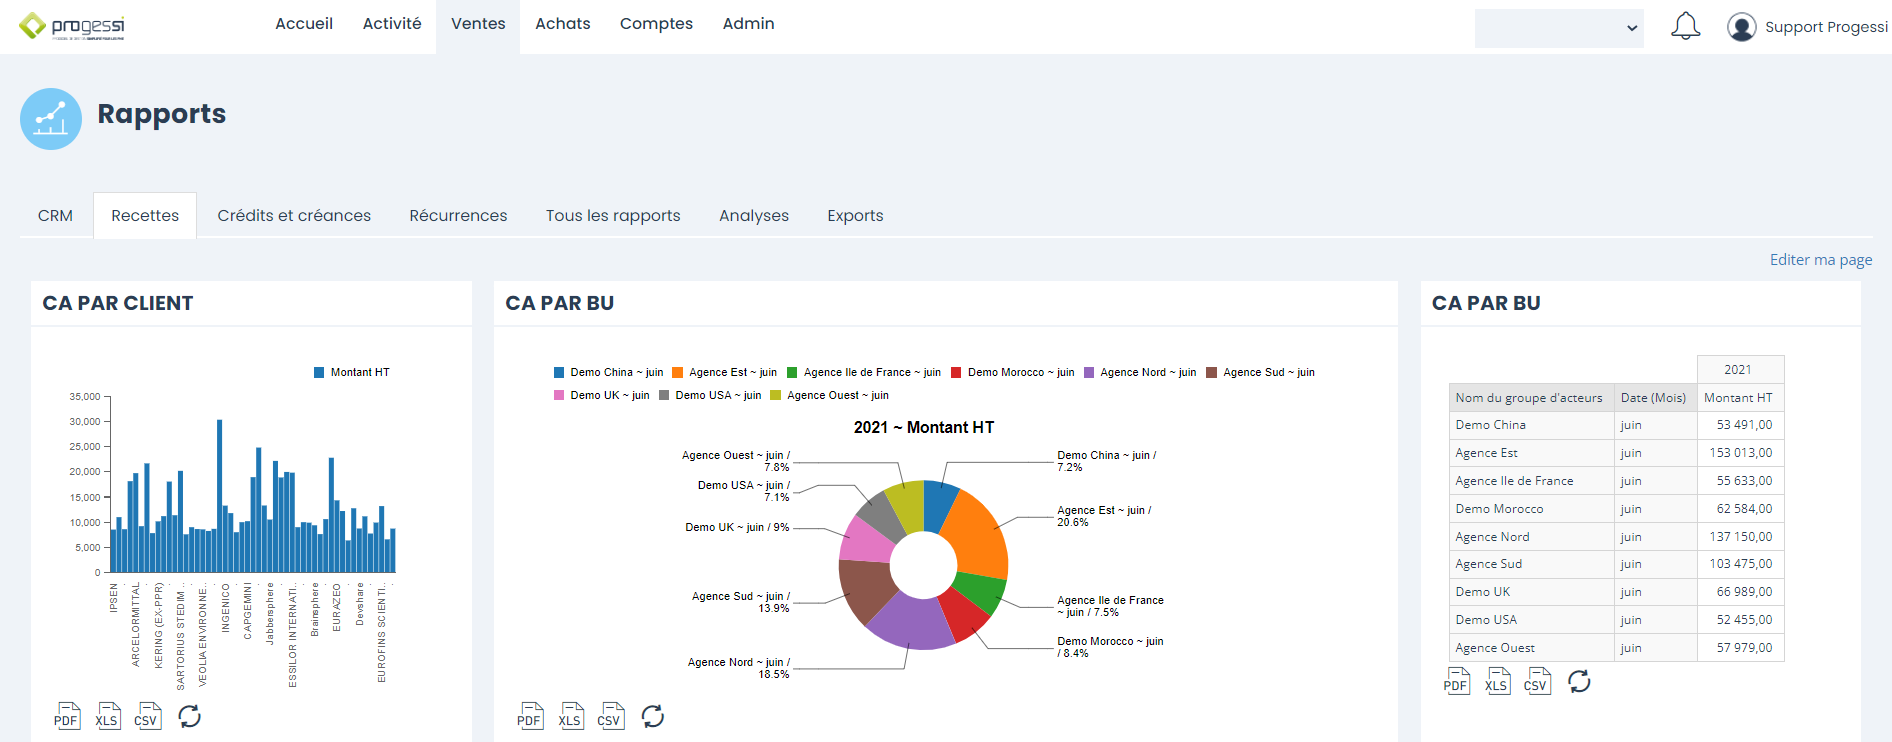 ProGesSi Software - Dashboard - Reporting 2